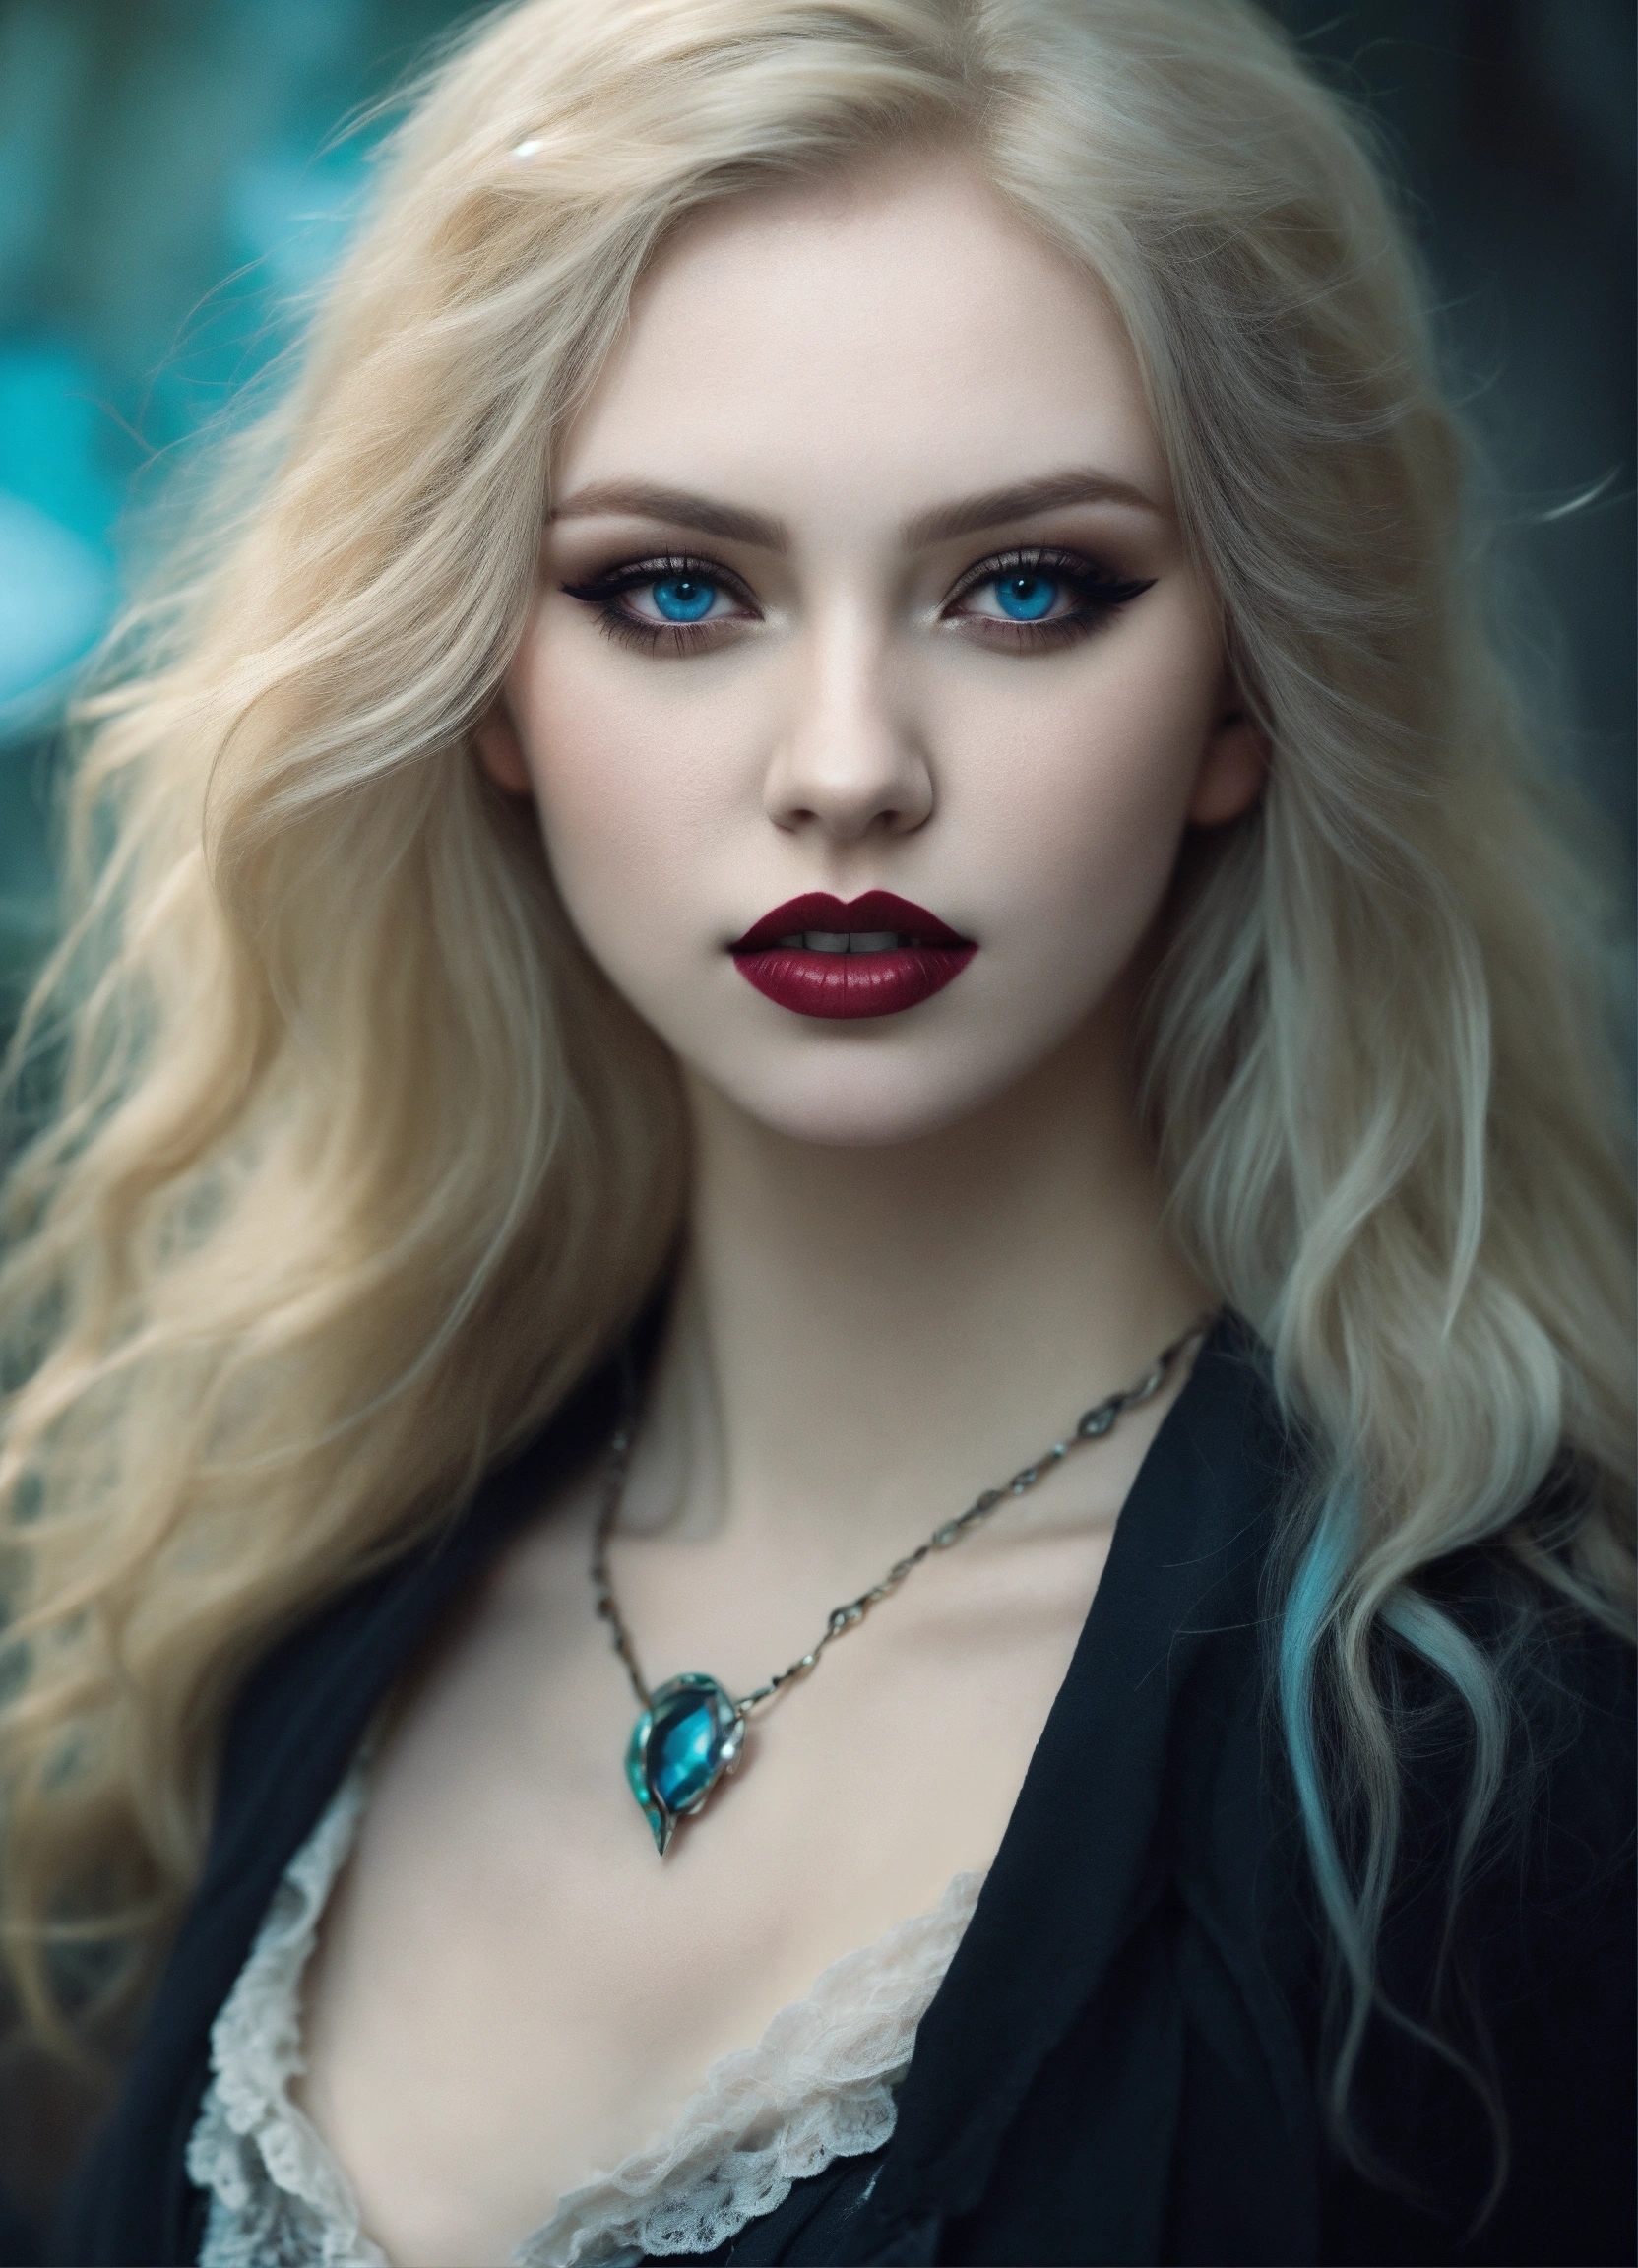 Lexica A Ridiculously Beautiful Blonde Vampire With Very Pale Blue Eyes And Pale Skin She 